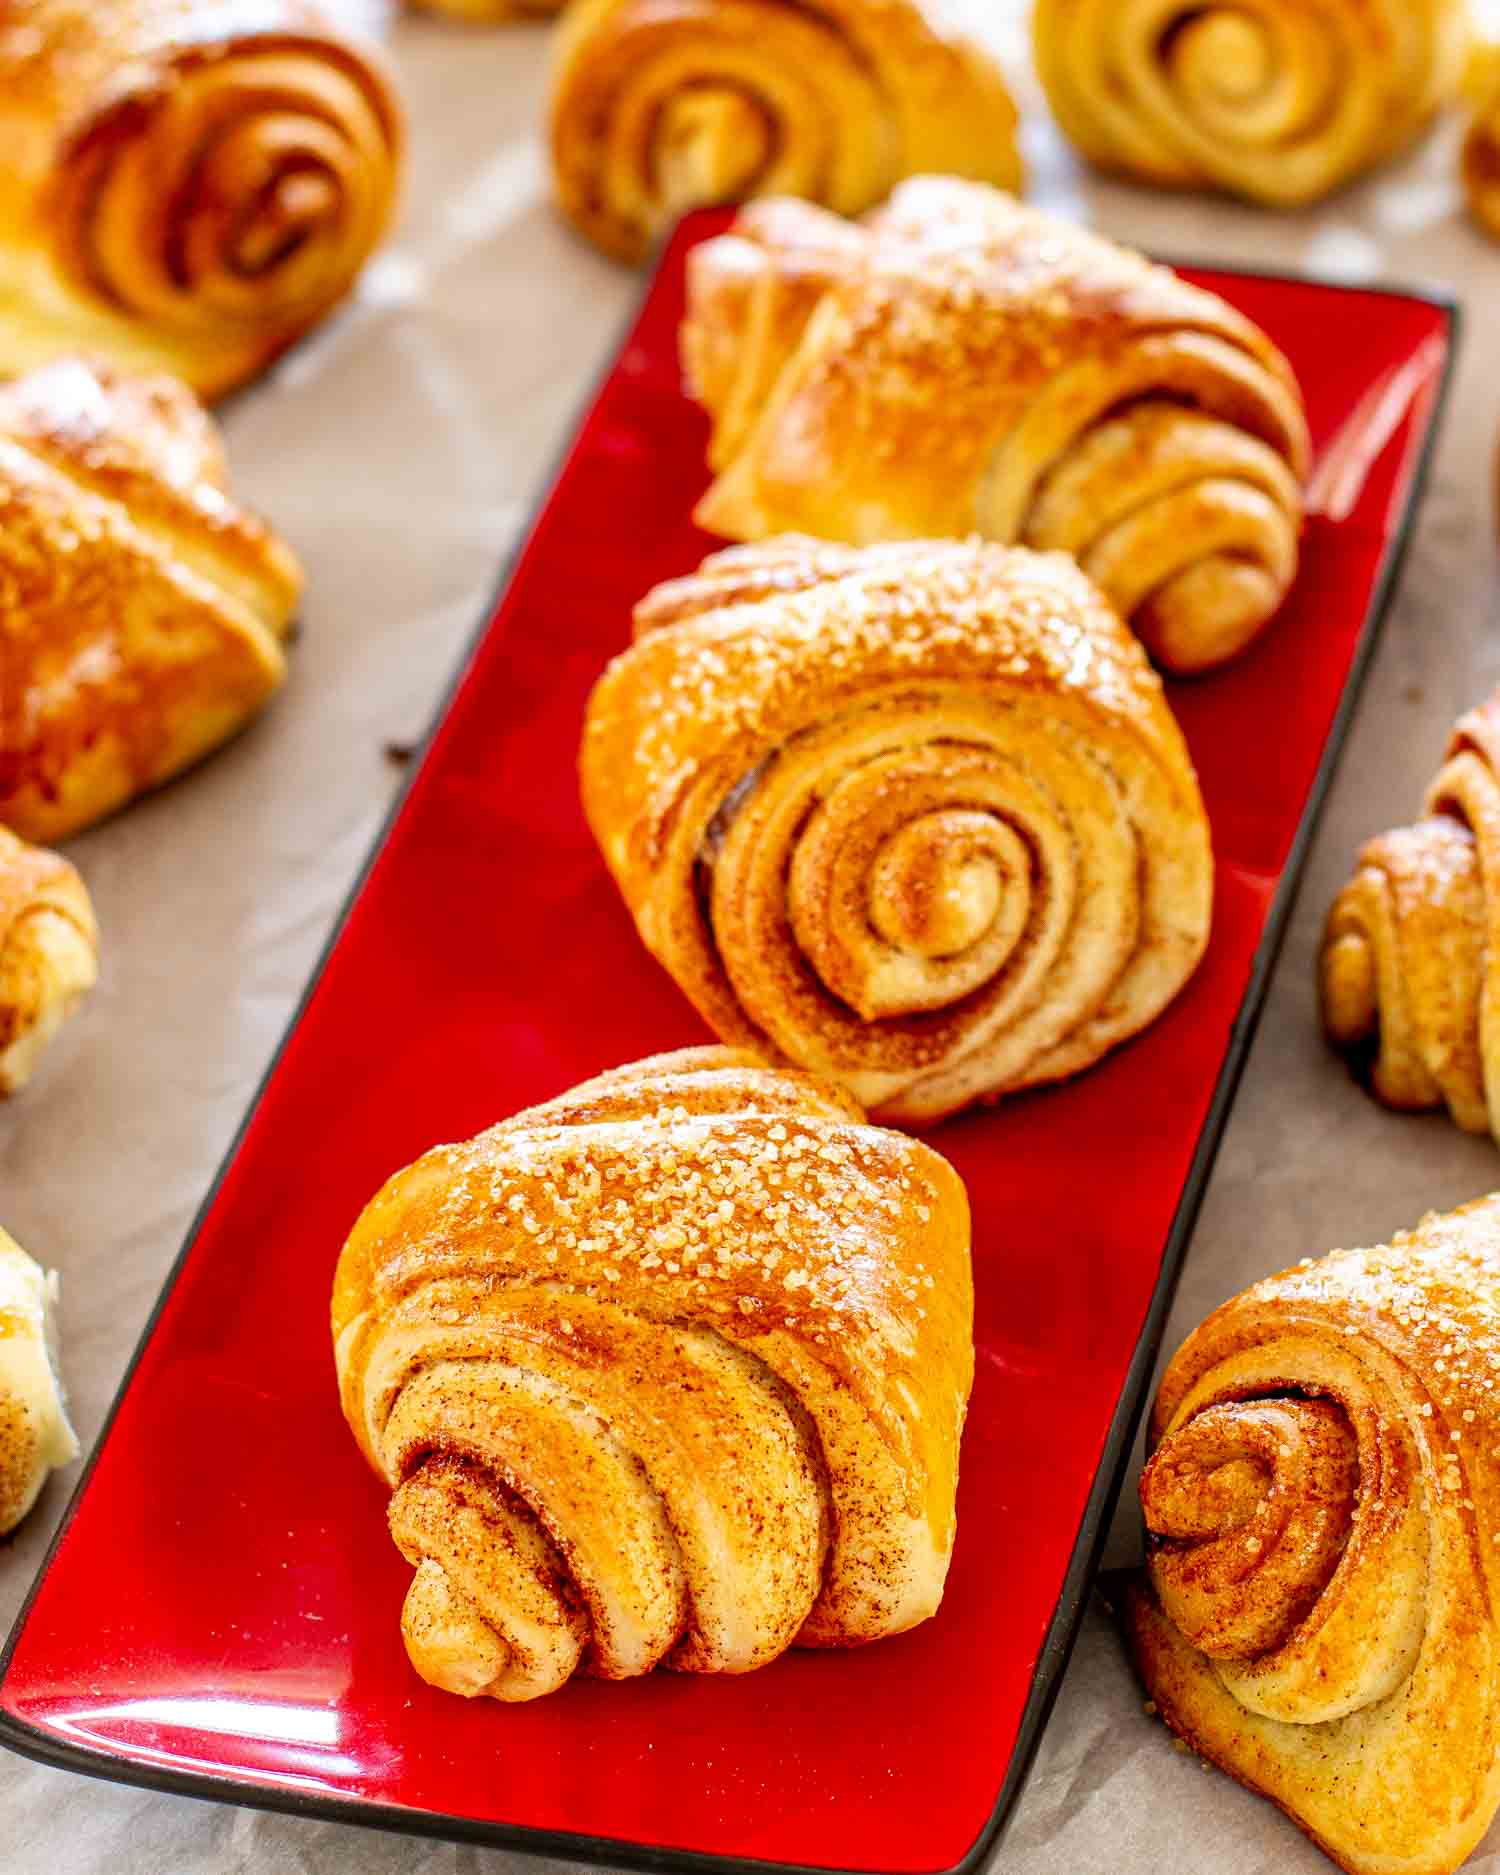 freshly baked finnish cardamom rolls on a red plate.